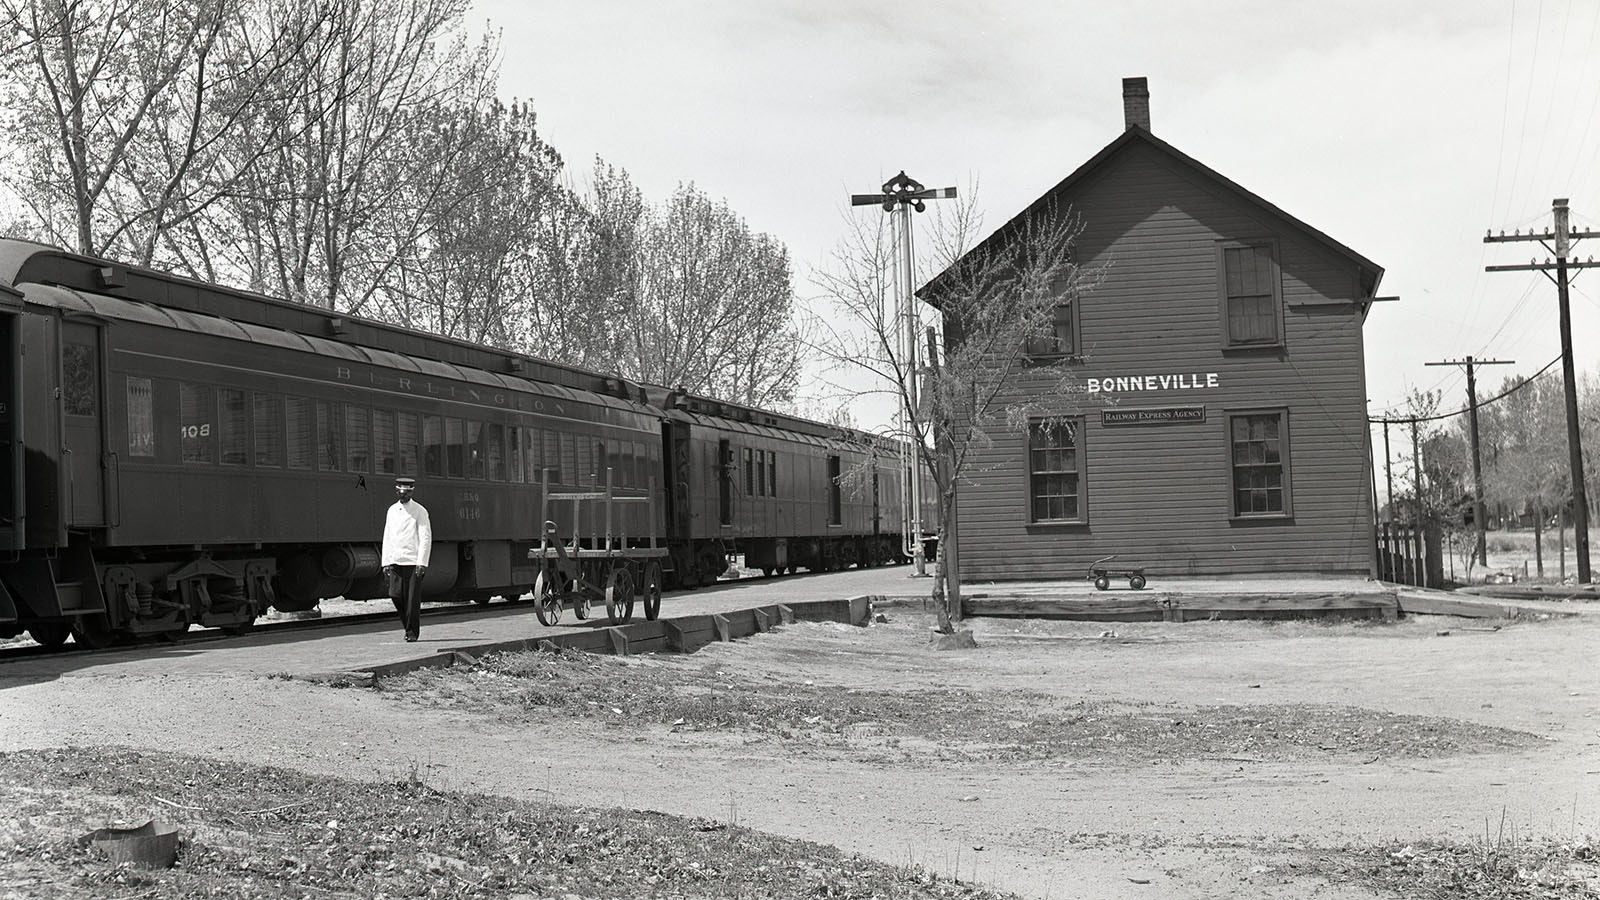 The train station at Bonneville, Wyoming.